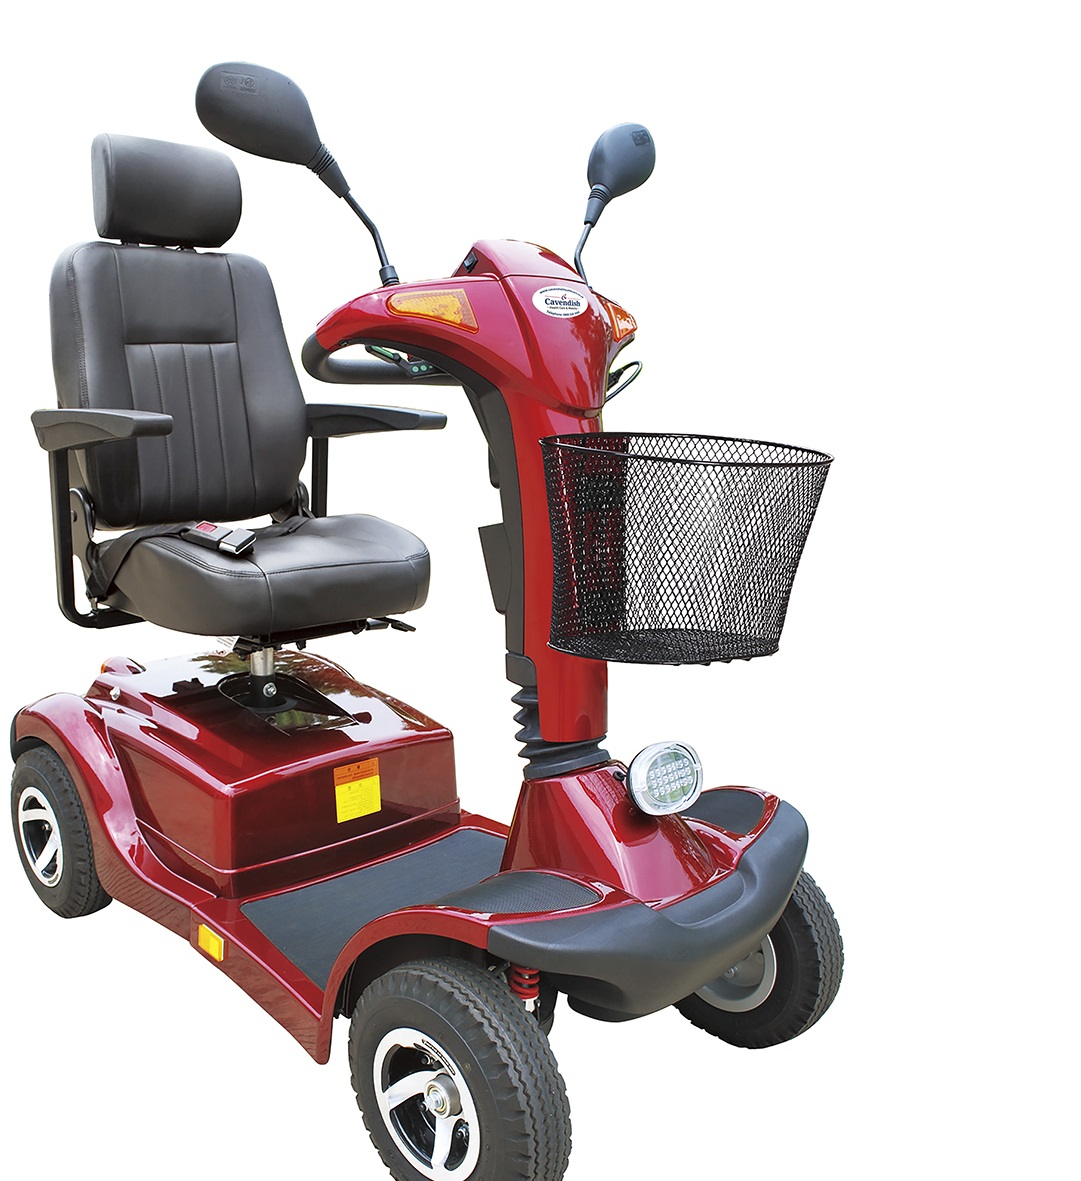 Riviera 500 Mobility Scooter 1